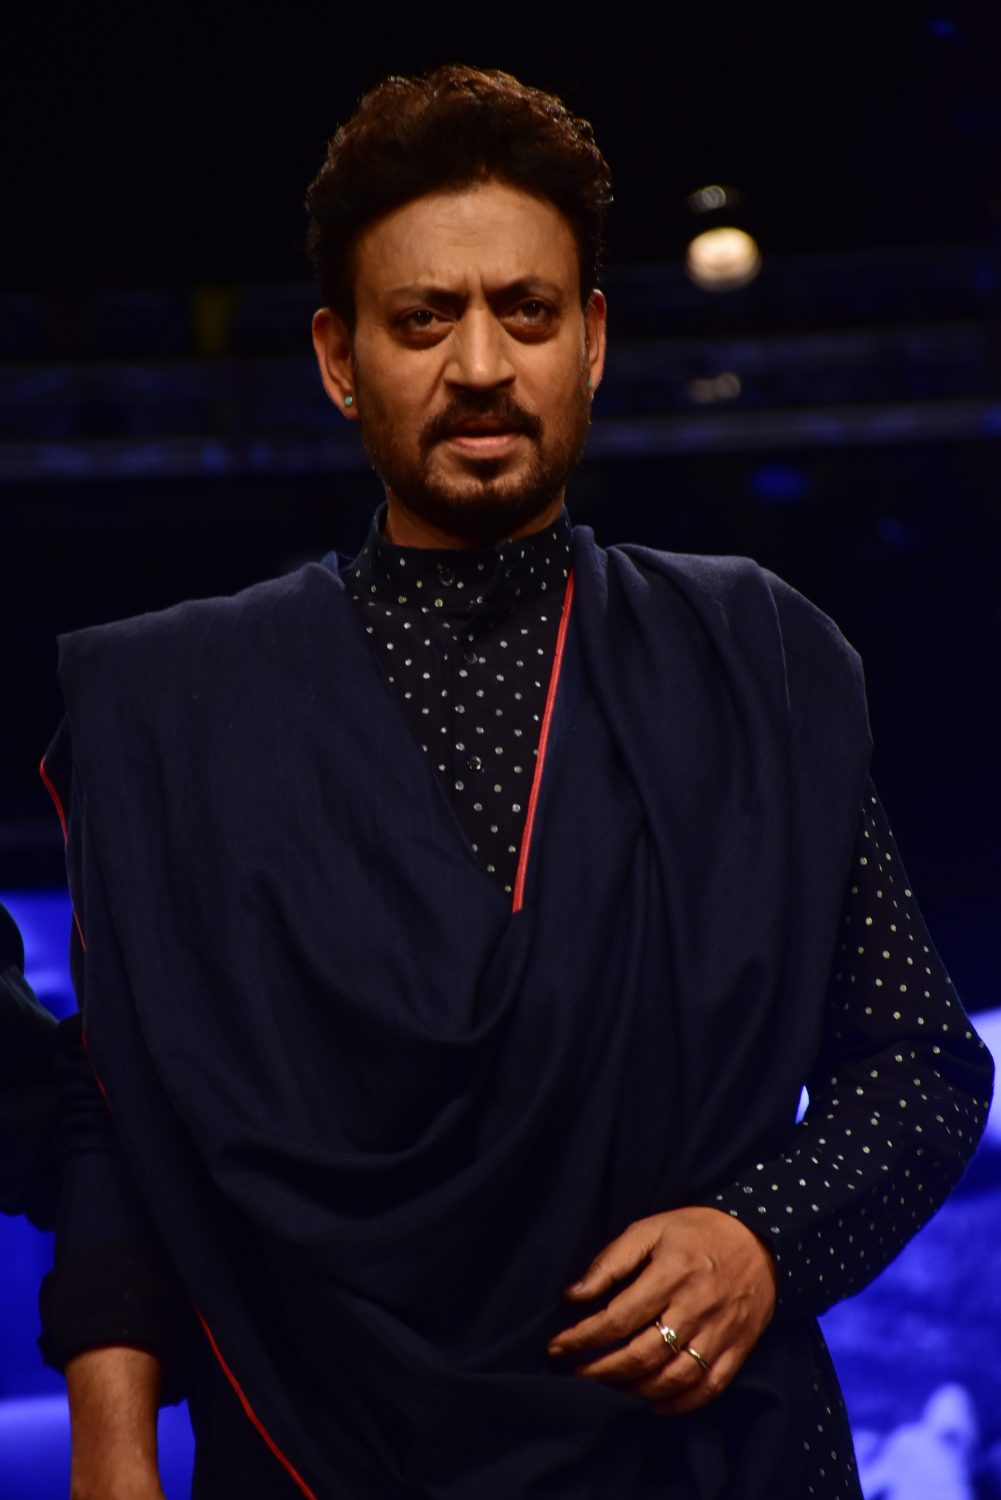 life of pi and jurassic world actor, irrfan khan, dies aged 53